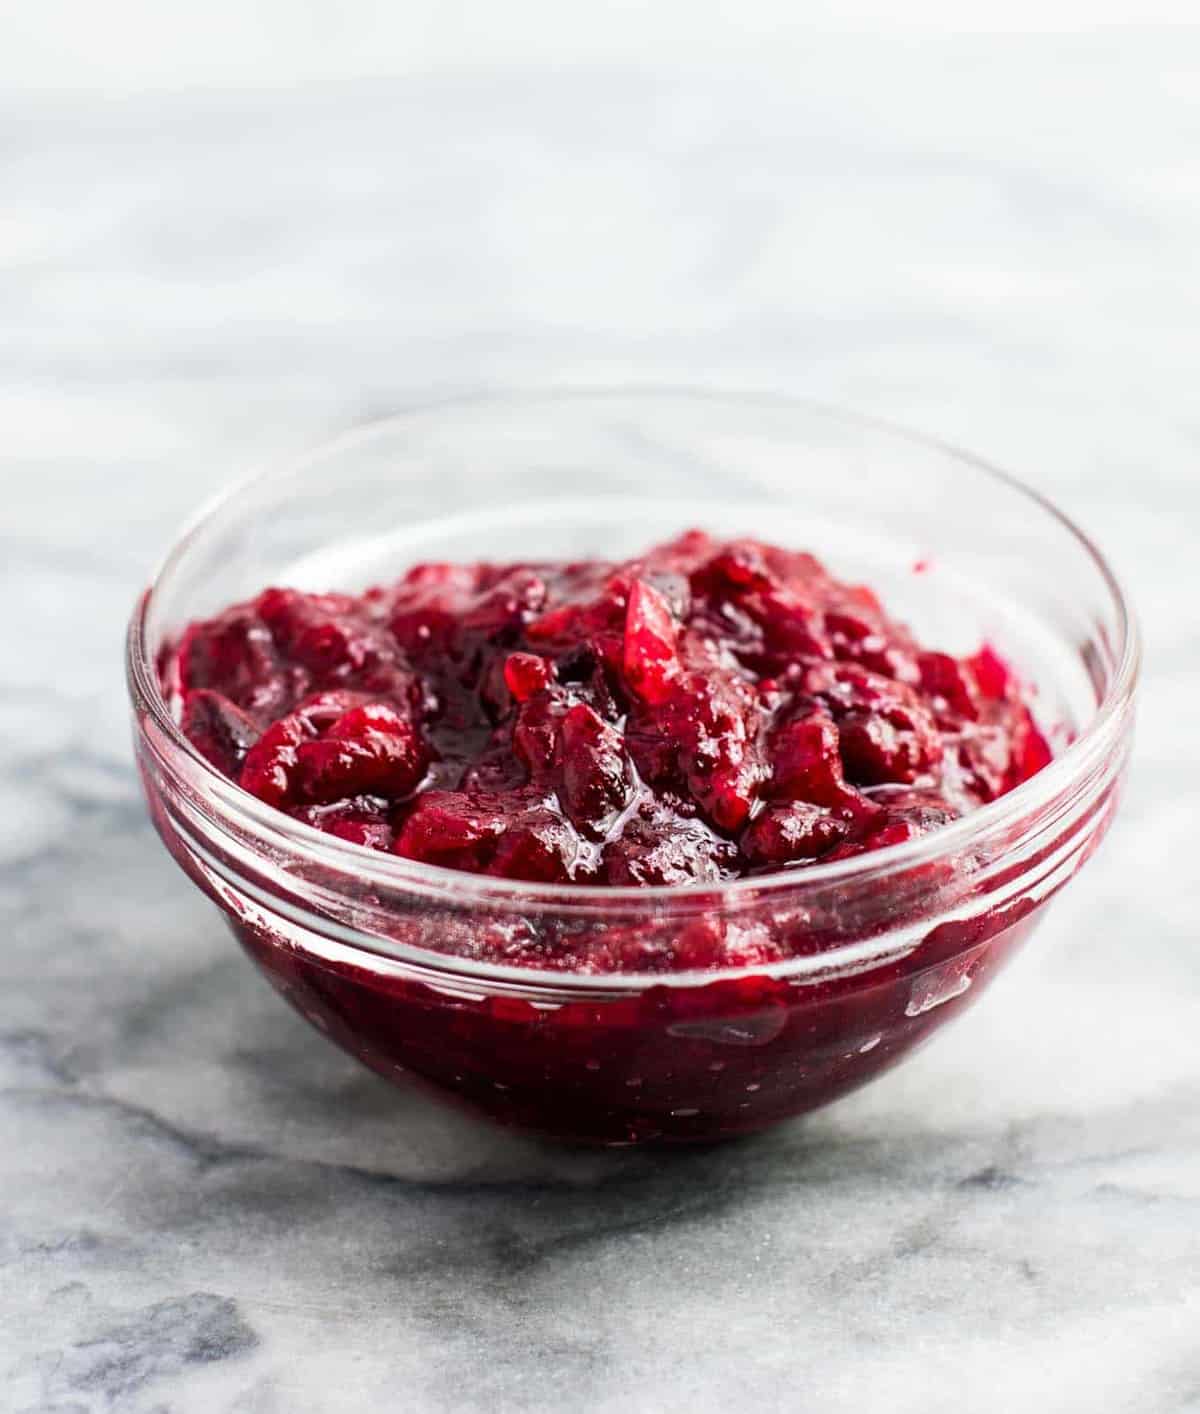 vegetarian thanksgiving menu - Healthy cranberry sauce recipe (vegan). Only 3 ingredients and low sugar. The best cranberry sauce I have ever had! We make this every year. #cranberrysauce #thanksgiving #vegan #vegetarian #healthycranberrysauce #freshcranberries